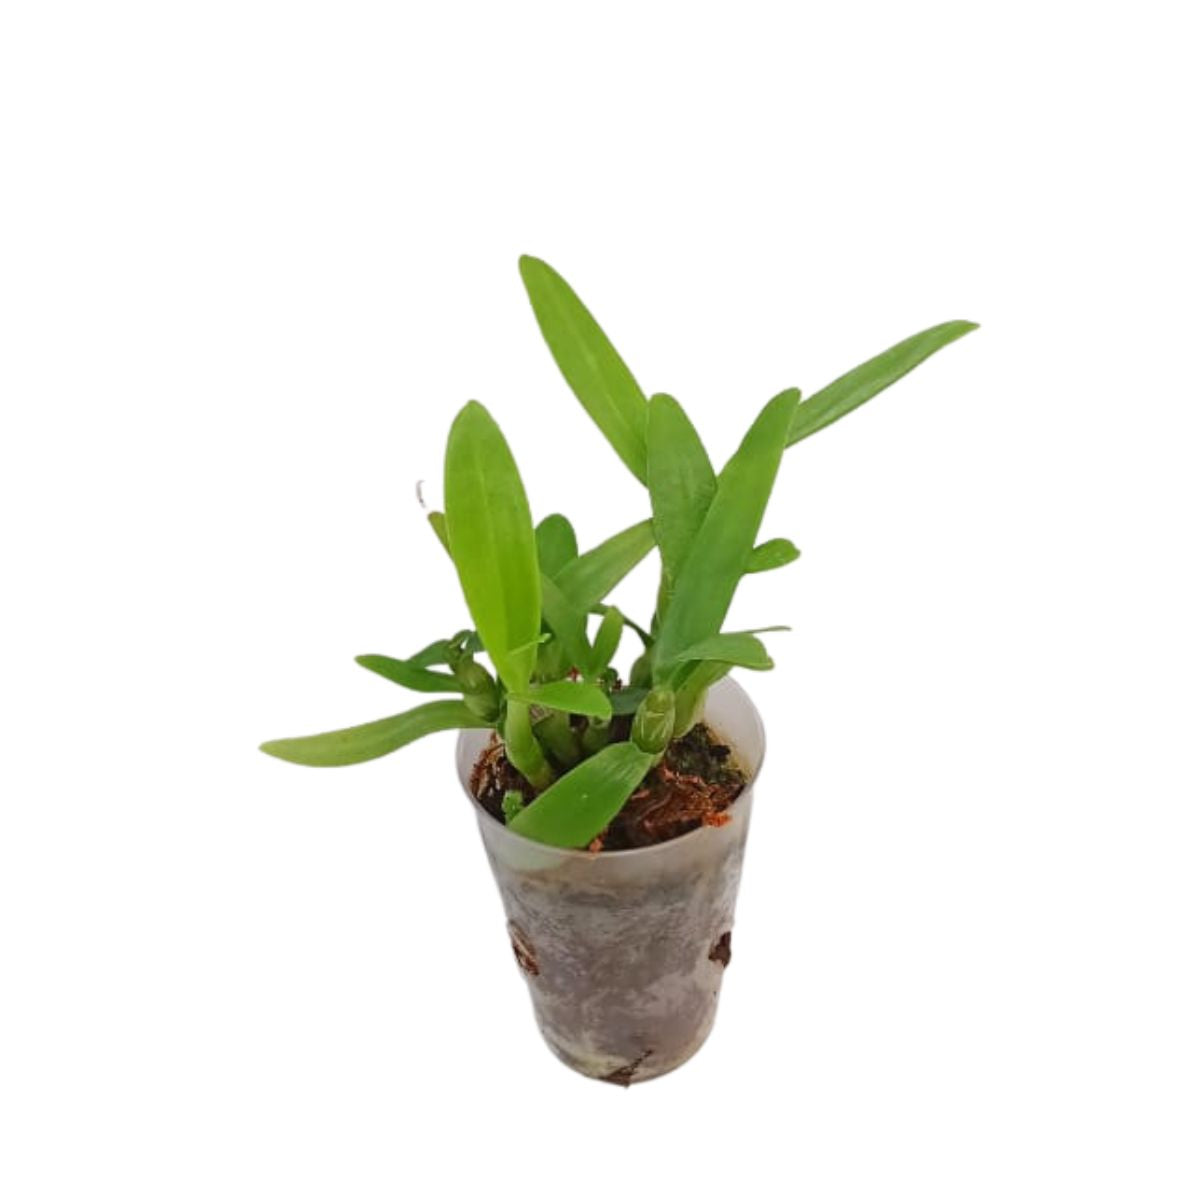 Denbrobium Nobile Sea Mary Snow King orchid blooming size plant - a healthy and vibrant specimen ready to bloom with beautiful white and seafoam green flowers.